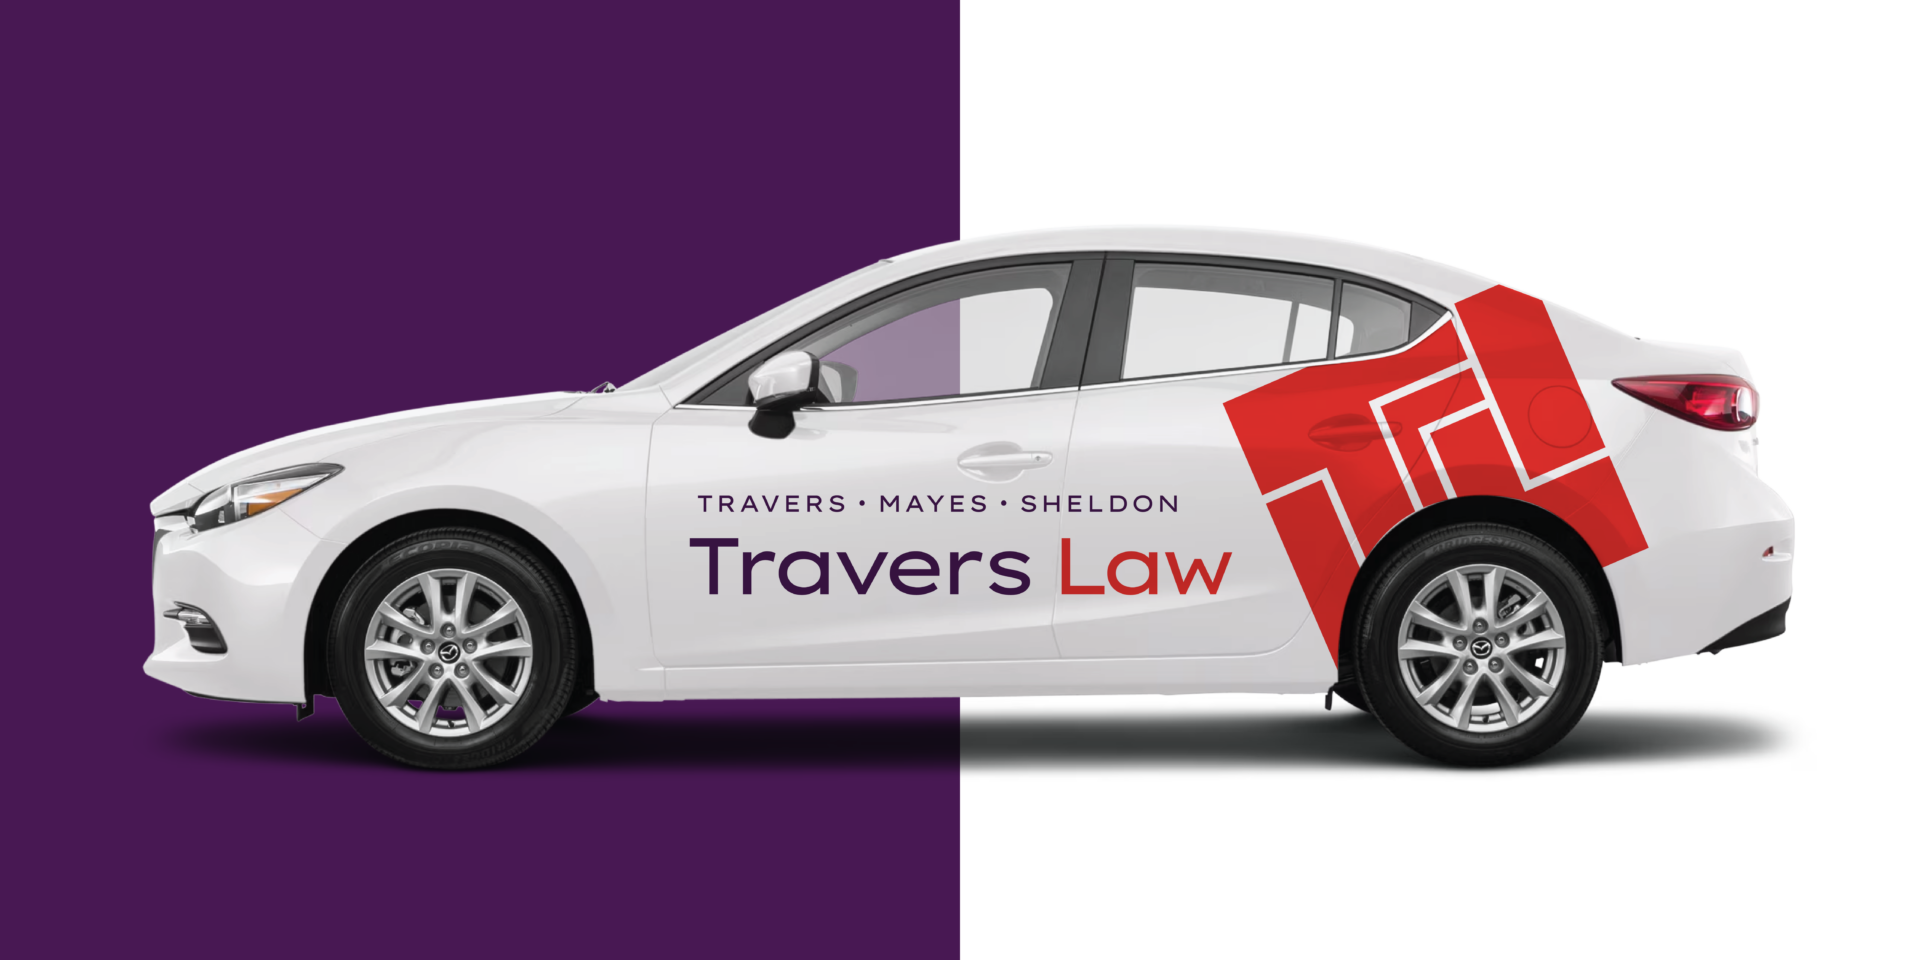 Car graphic design for Travers Law firm rebrand